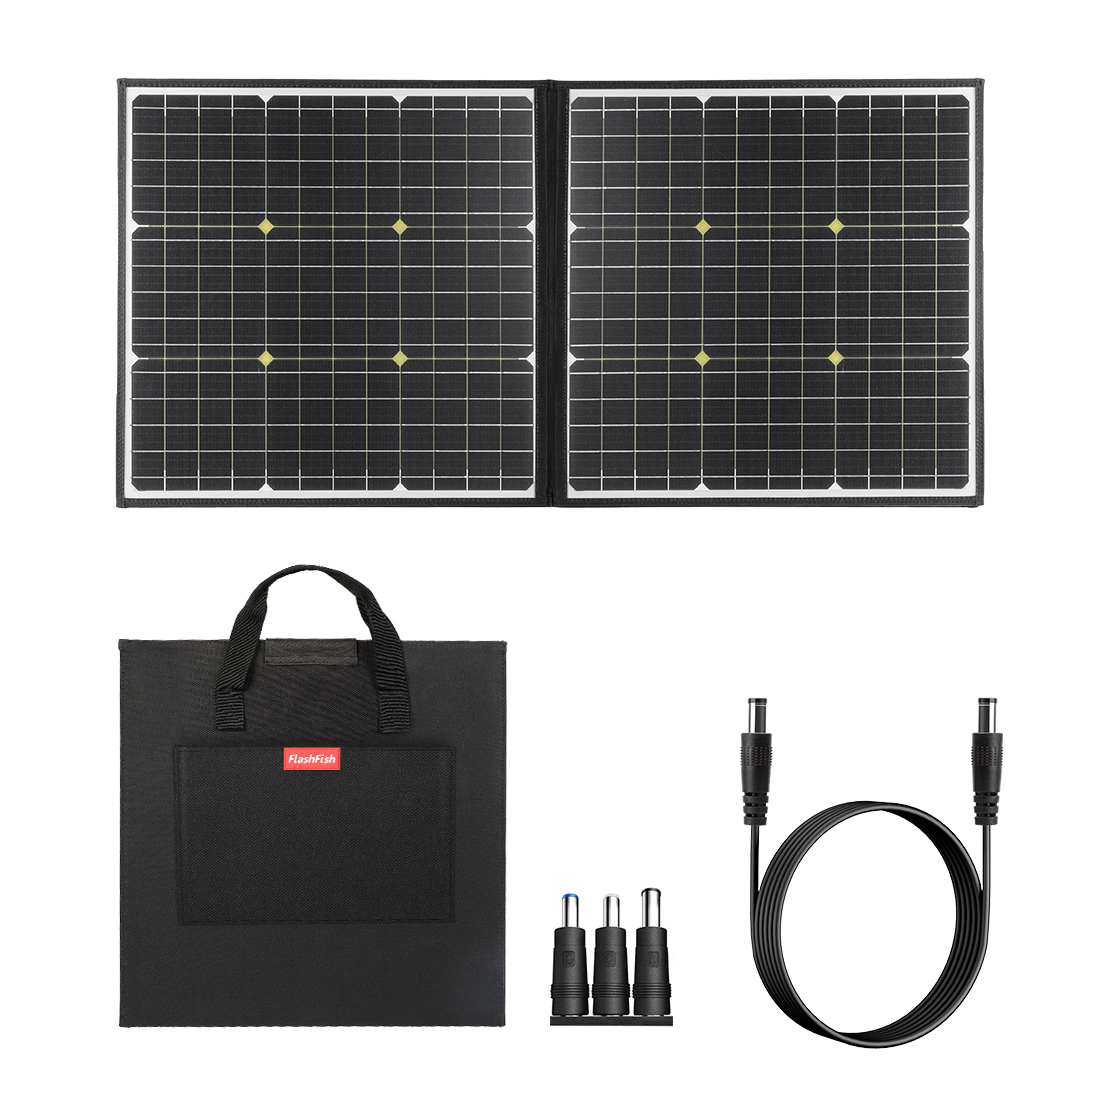 Find EU Direct FLASHFISH A301 320W 80000mAh Portable Power Station Set With 100W Solar Panel For Outdoor Emergency Power Supply for Sale on Gipsybee.com with cryptocurrencies